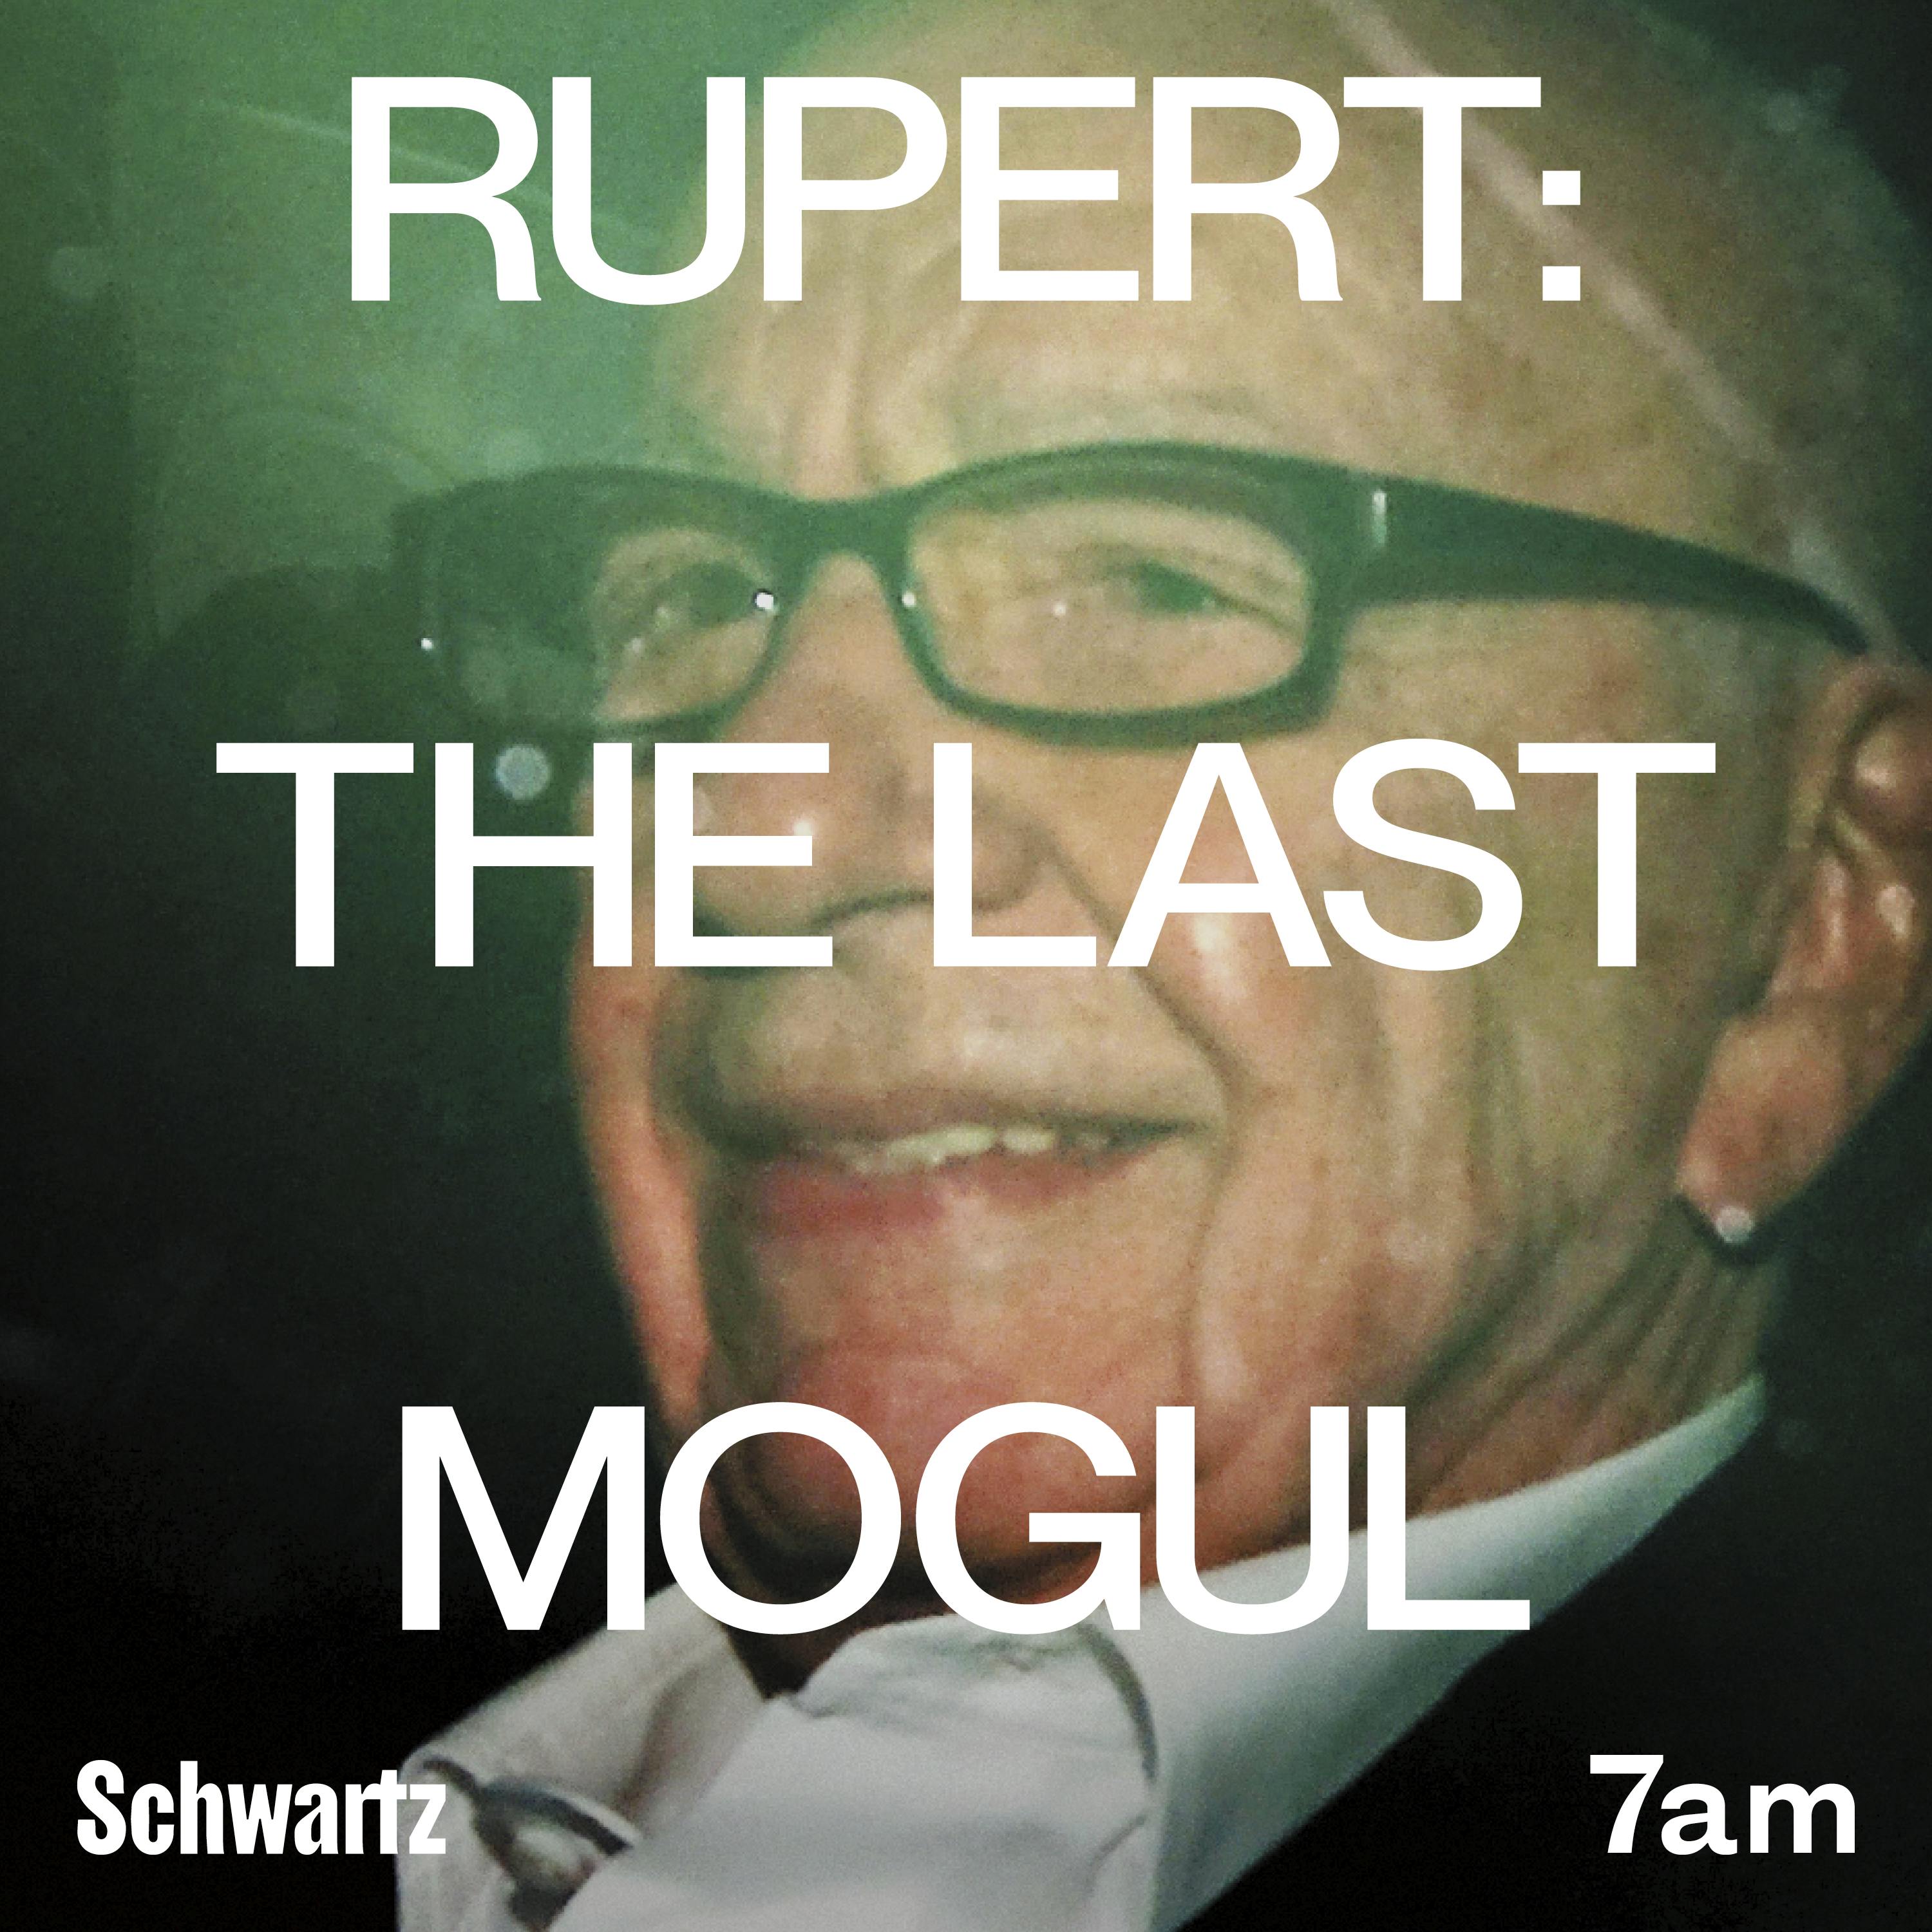 Rupert: The last mogul: There’s only one Rupert